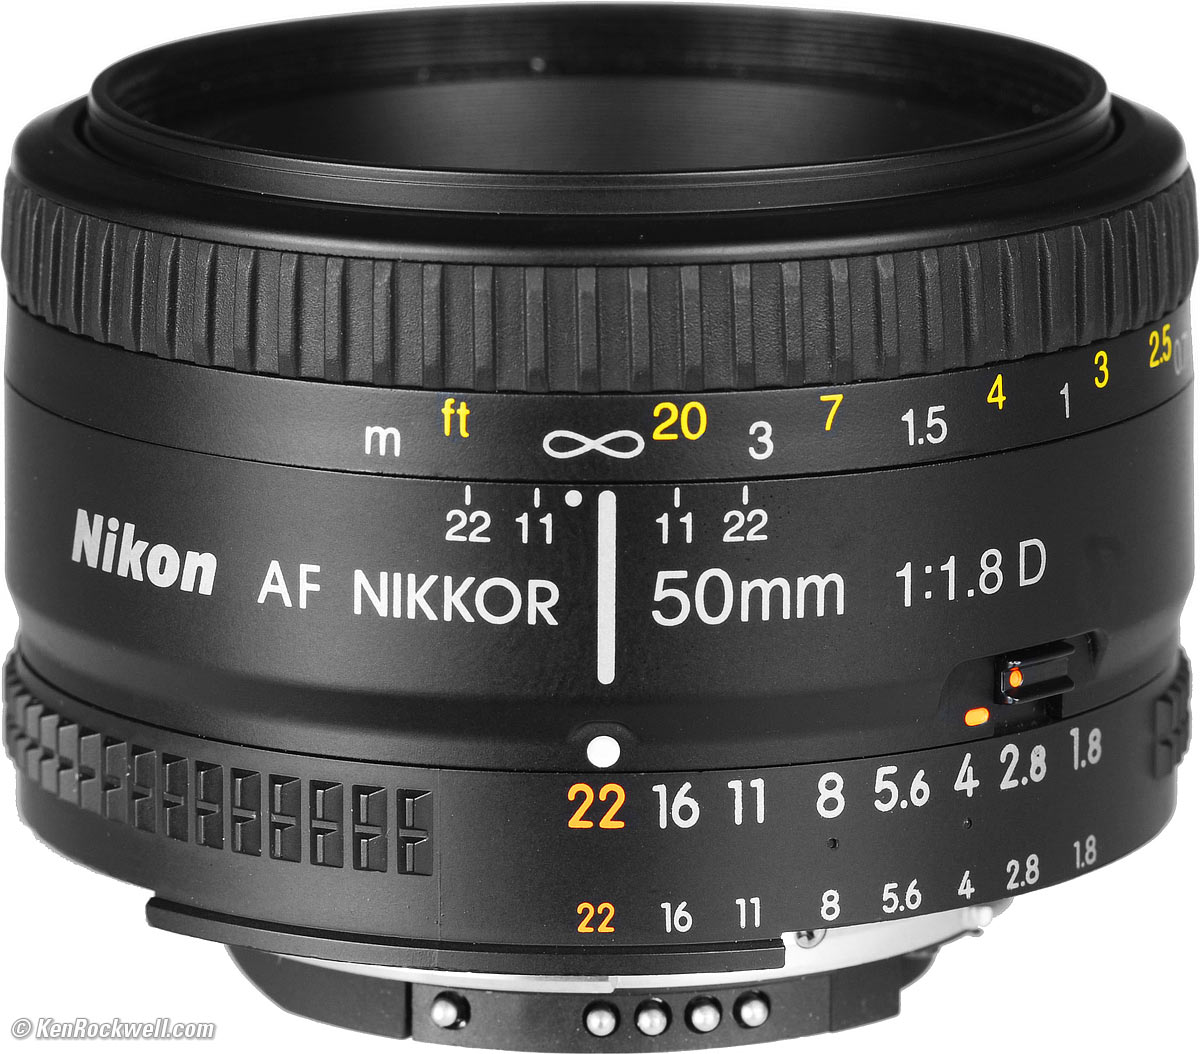 Is the Nikkor 50mm 1.8 D autofocus works on the new D7000?: Nikon DX